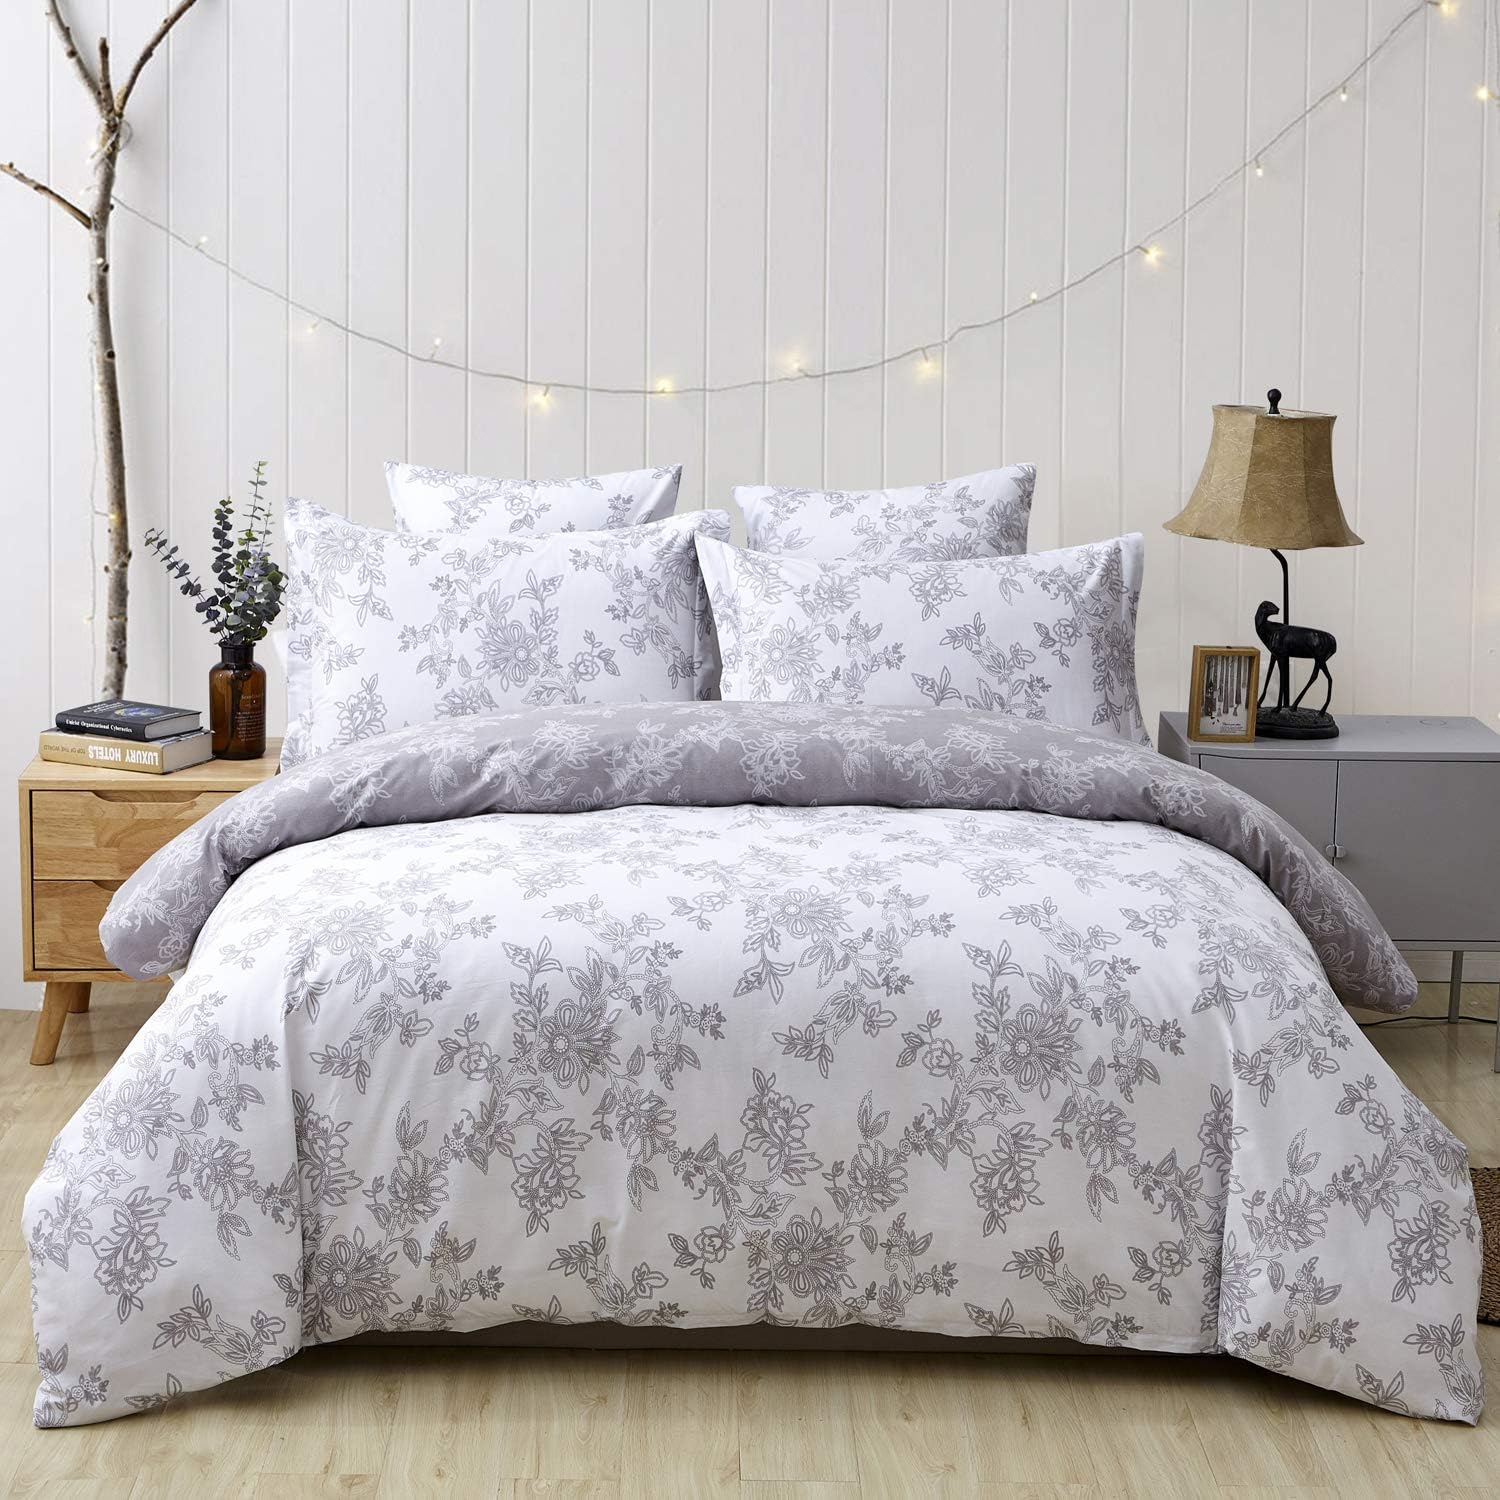 FADFAY Reversible Duvet Cover Set Queen Size Vintage Floral 100% Cotton Ultra Soft Grey and White Bedding with Hidden Zipper Closure 3 Pieces, 1Duvet Cover & 2Pillowcases